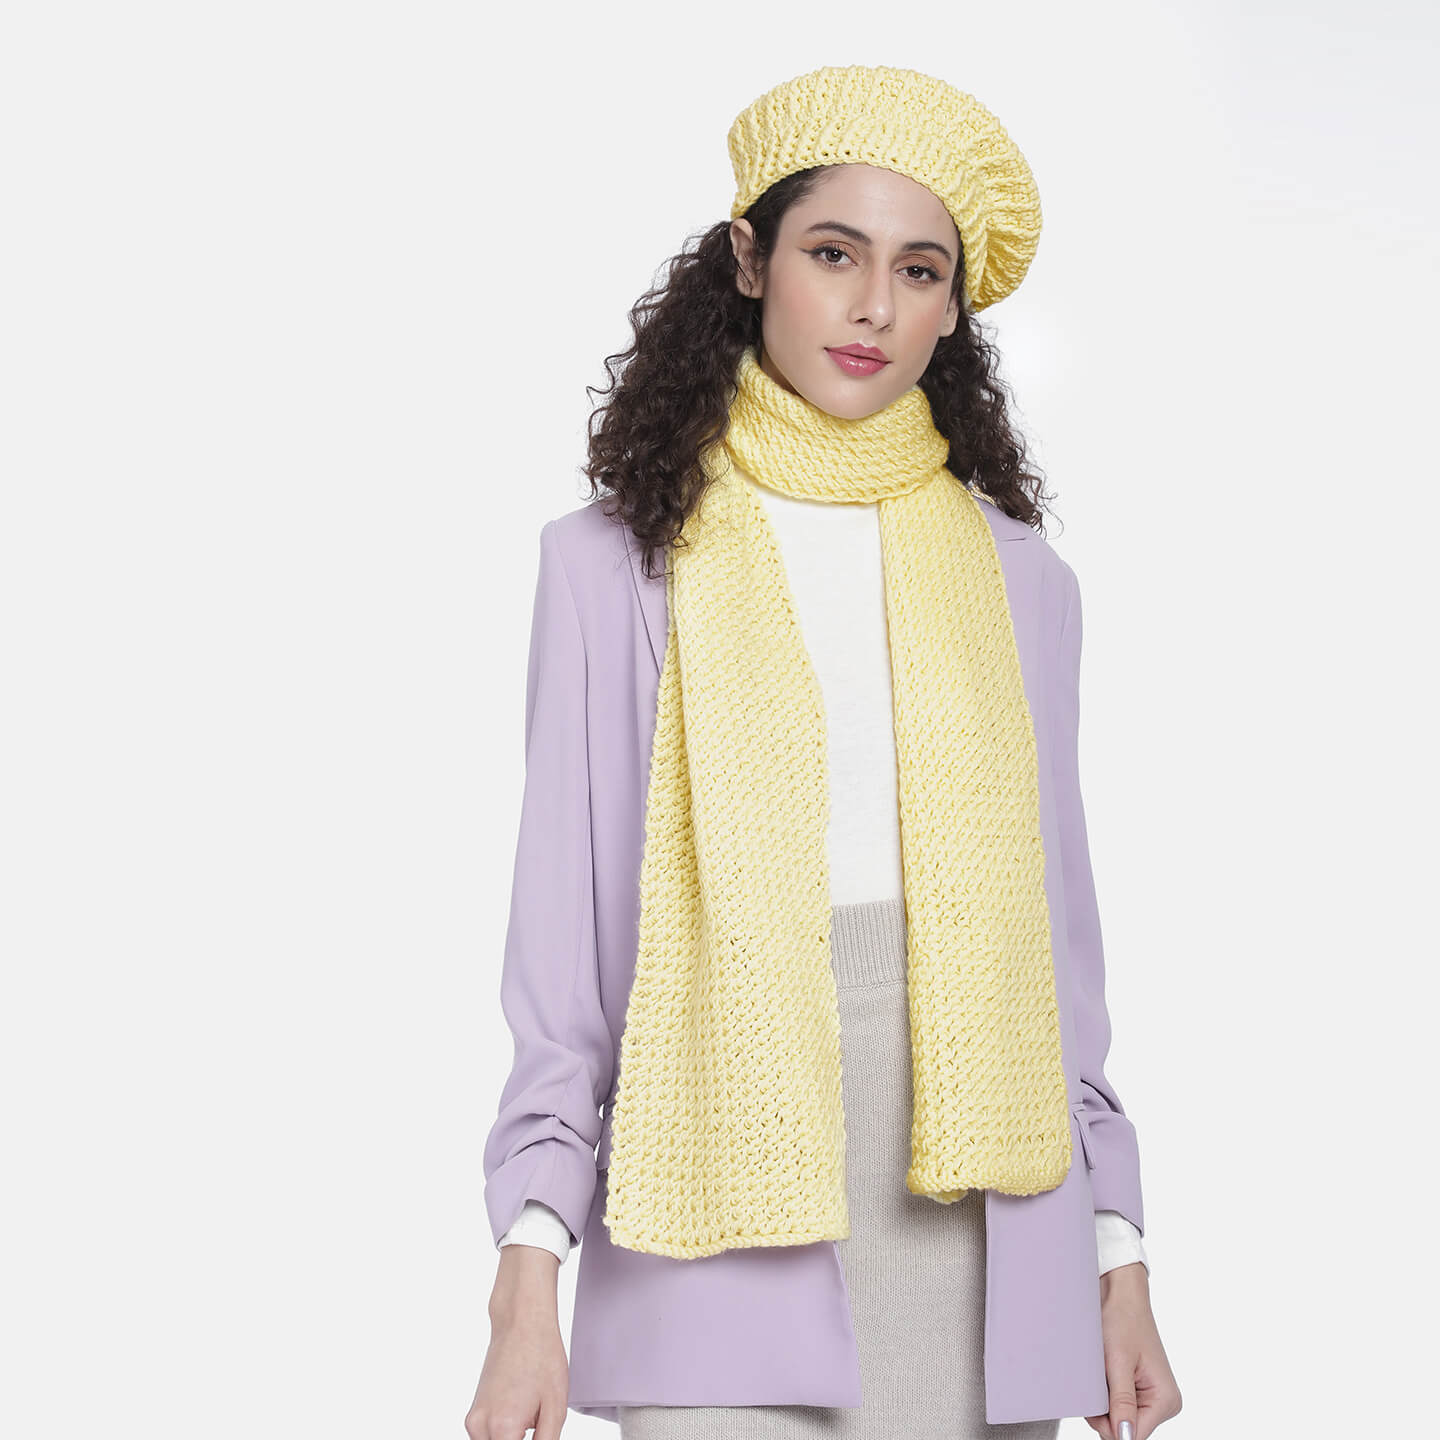 Beanie and Scarf Coordinating Set - 3184